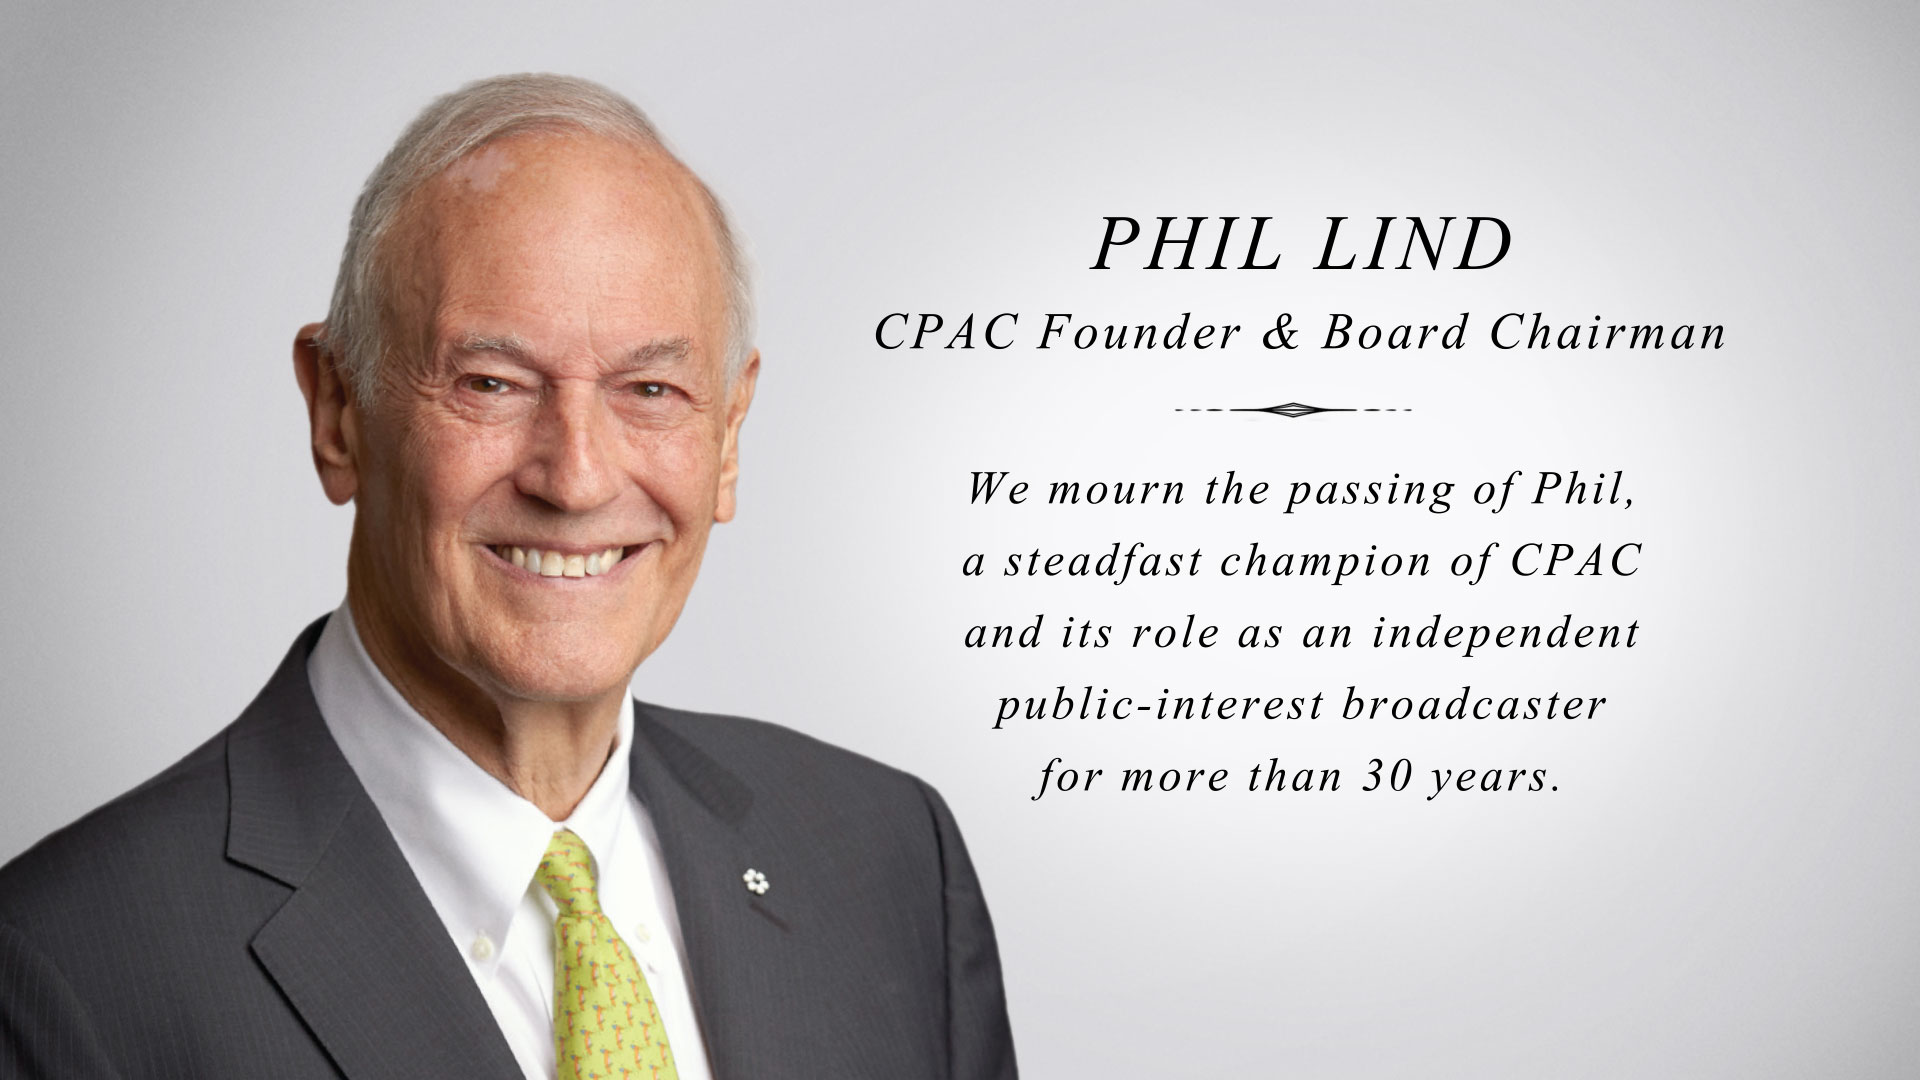 CPAC deeply mourns the passing of our founder and board chairman, Phil Lind.